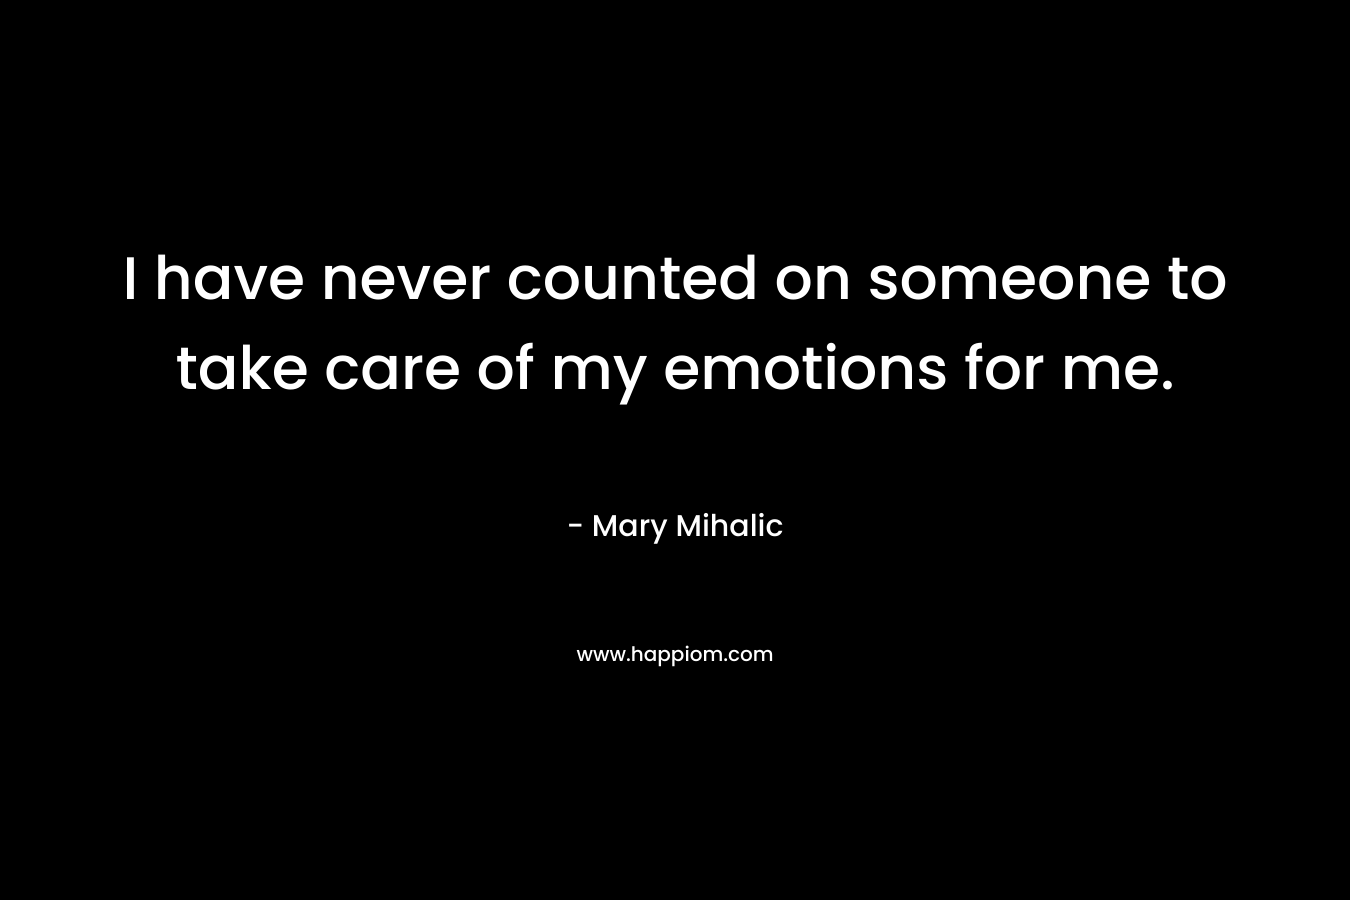 I have never counted on someone to take care of my emotions for me.